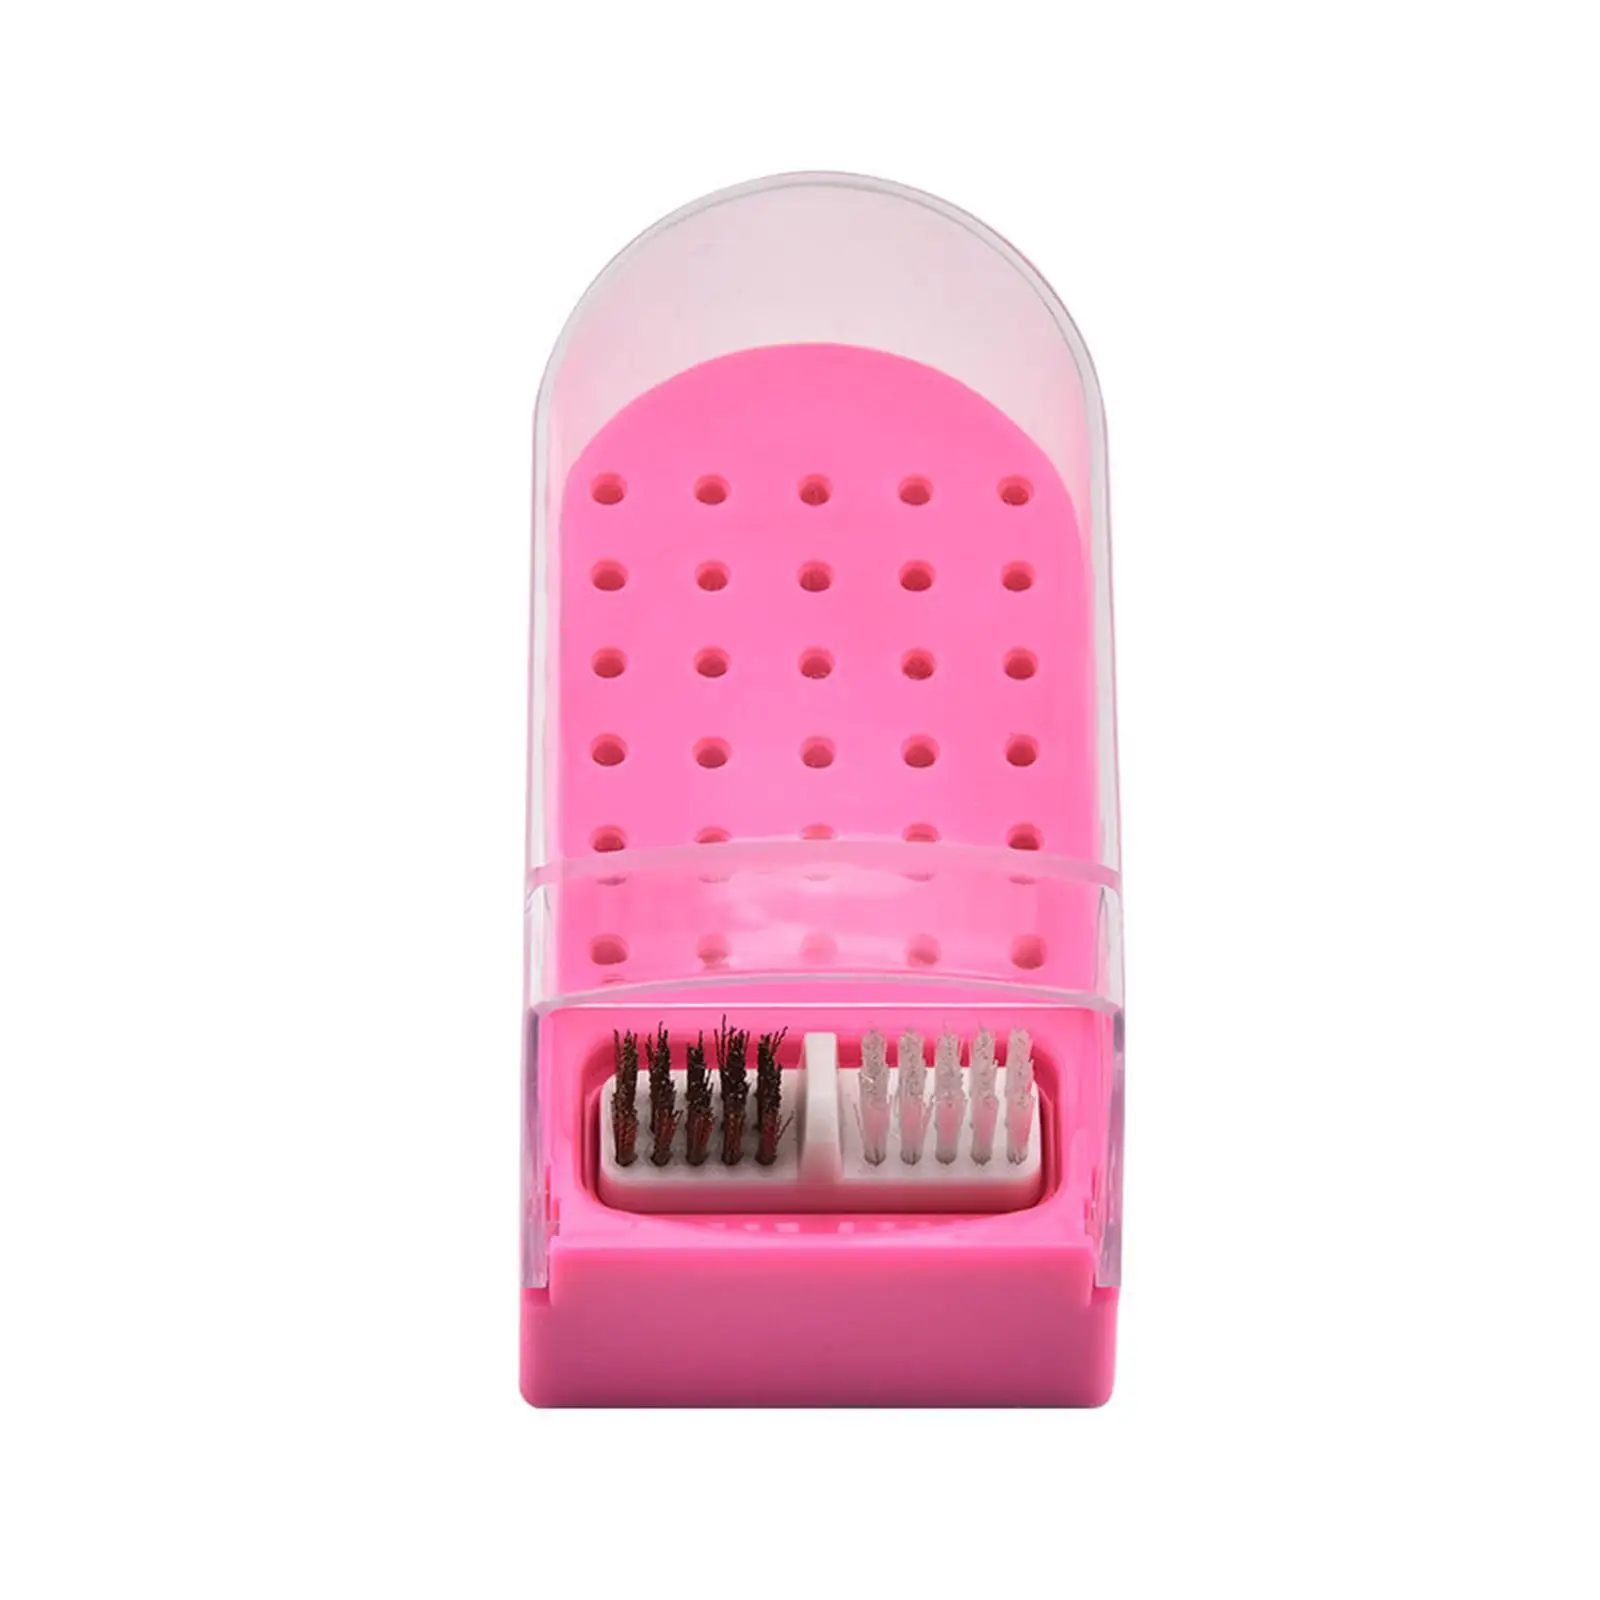 Nail Drill Bit Holder Home DIY Dustproof with Cleaning Brass Wire and Soft Brushes Nail Bit Organizer 30 Slots Container Case